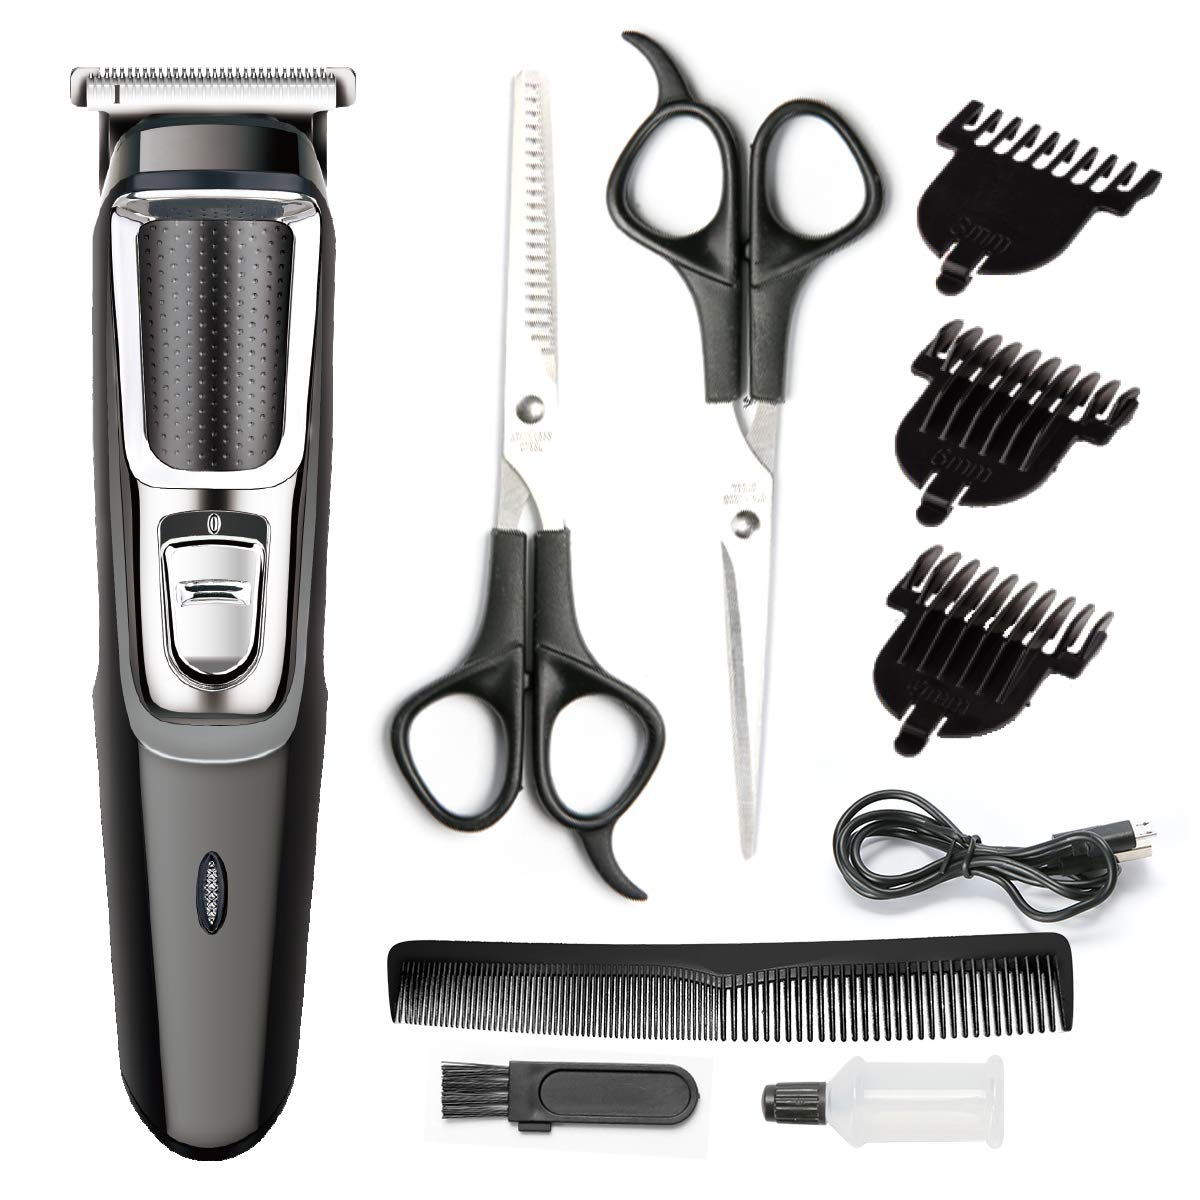 Hair Clippers for Men Professional Cordless Clippers Haircut Hair